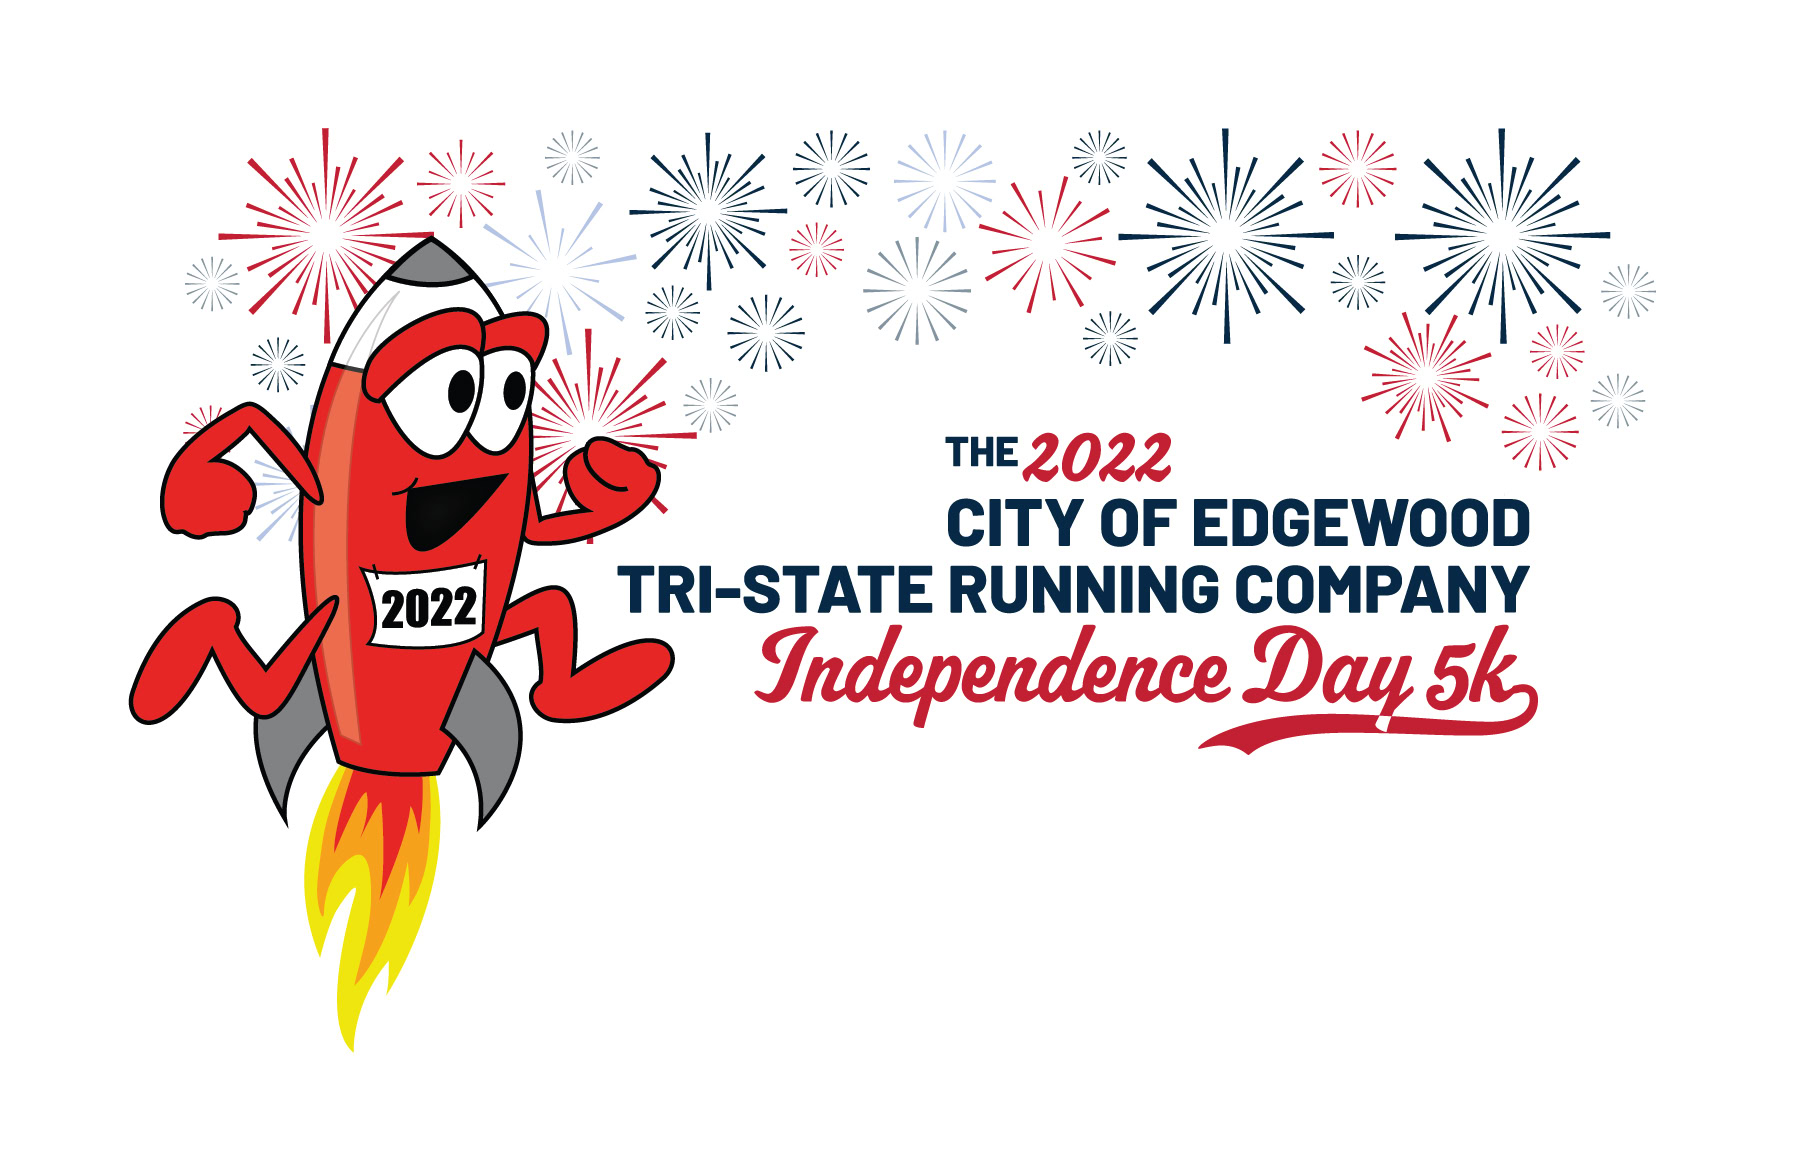 City of Edgewood/TriState Running Company Independence Day 5K Run/Walk